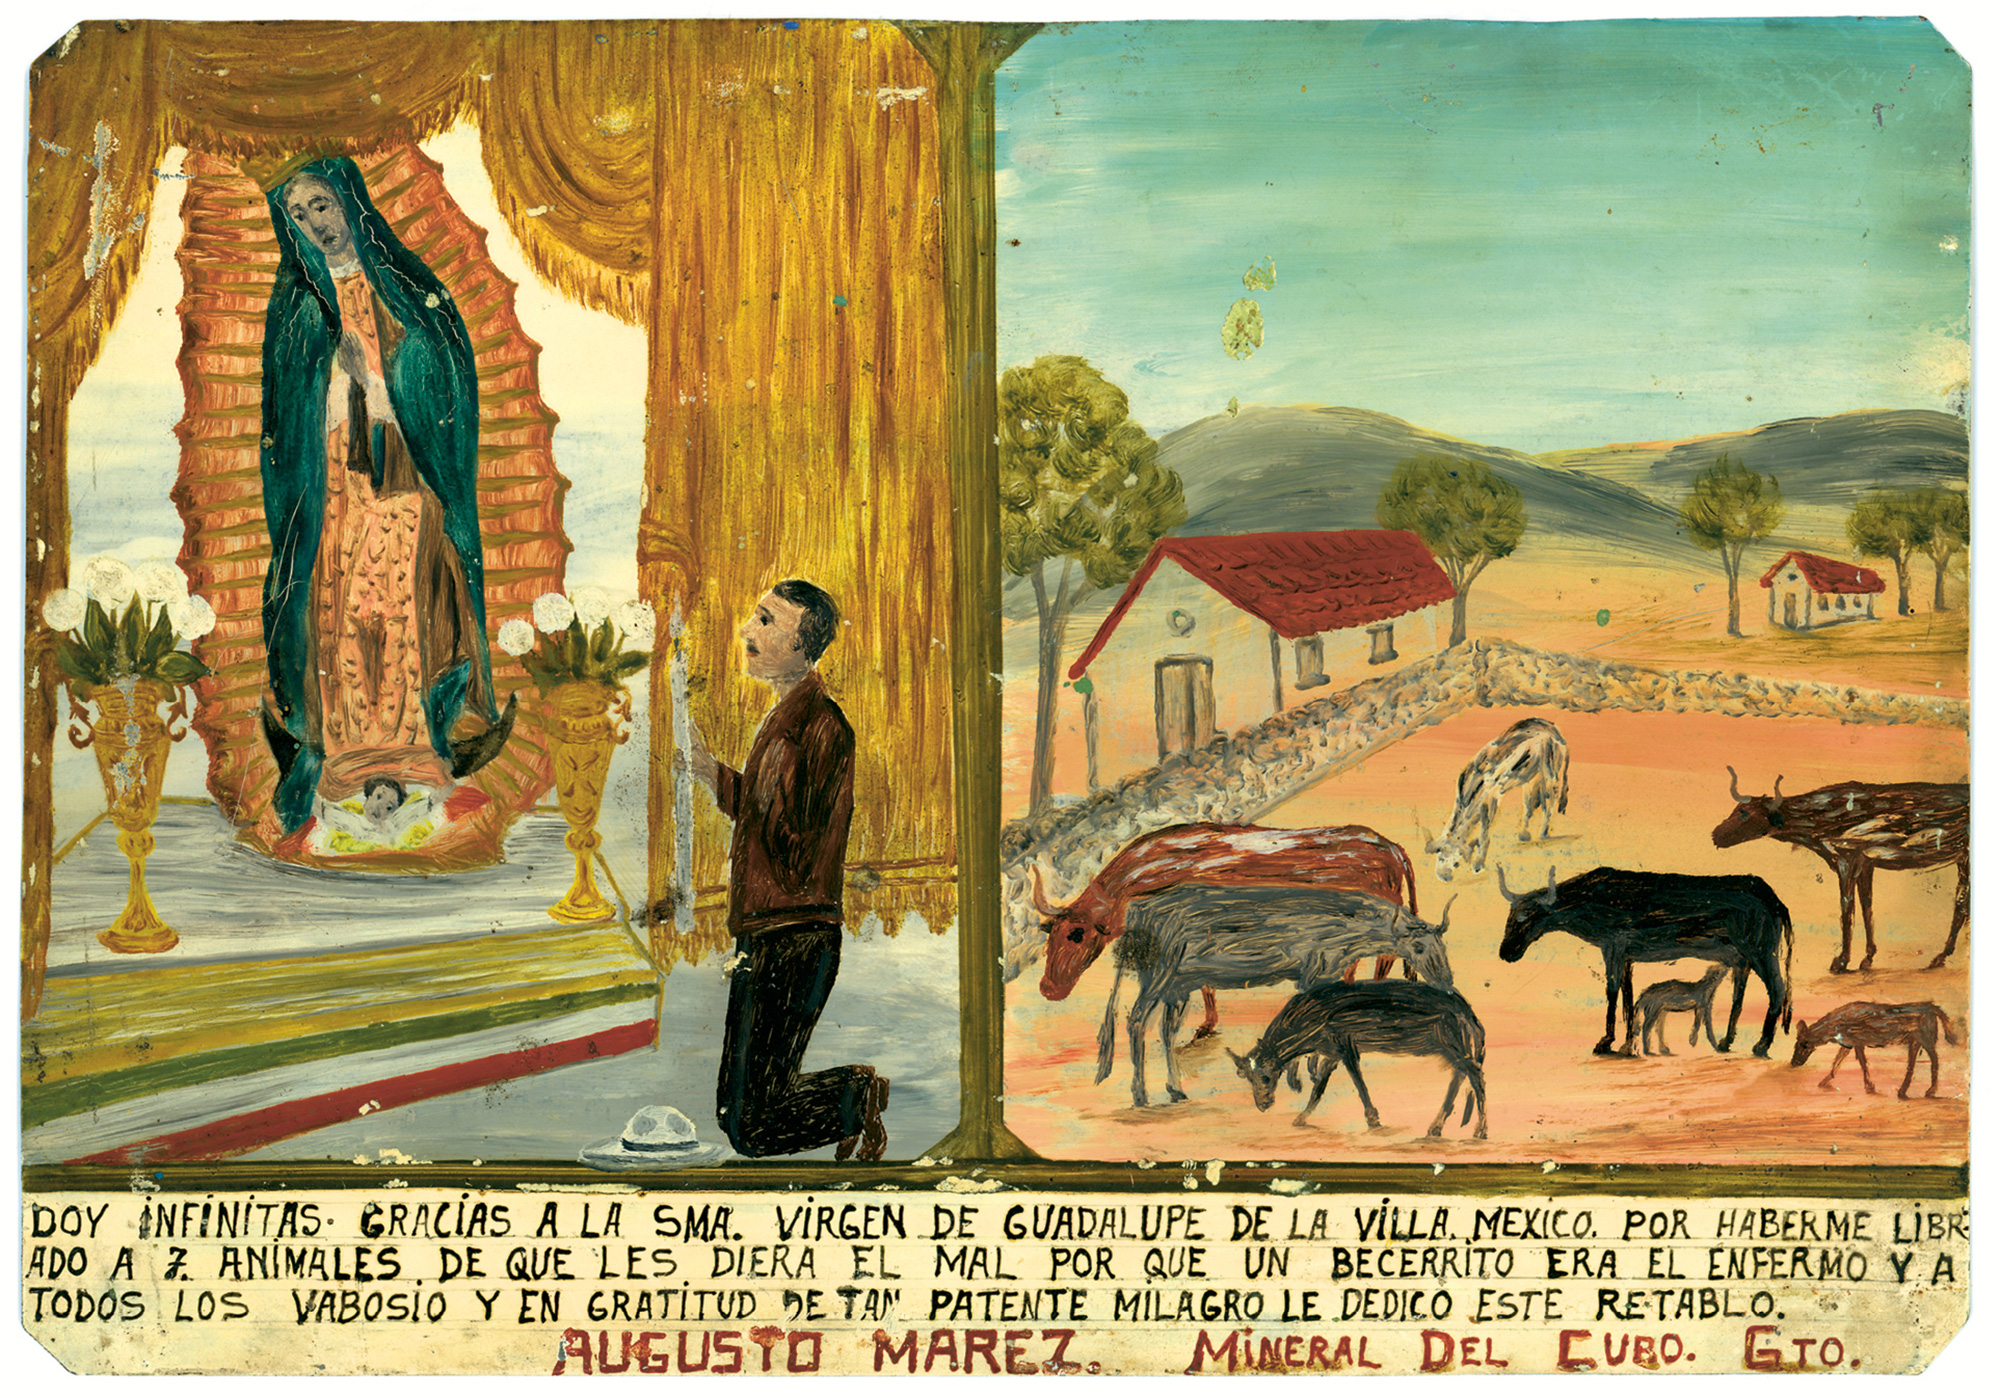 An ex-voto painting depicting rancher Augusto Marez in a chapel praying to the Virgin of Guadalupe, who hovers above a patriotic banner. He gives “infinite thanks” because she saved seven of his cows from an unnamed illness (he calls it a “mal,” or evil) transmitted when a sick calf slobbered all over the other animals. The eight survivors graze happily in the adjacent corral. 